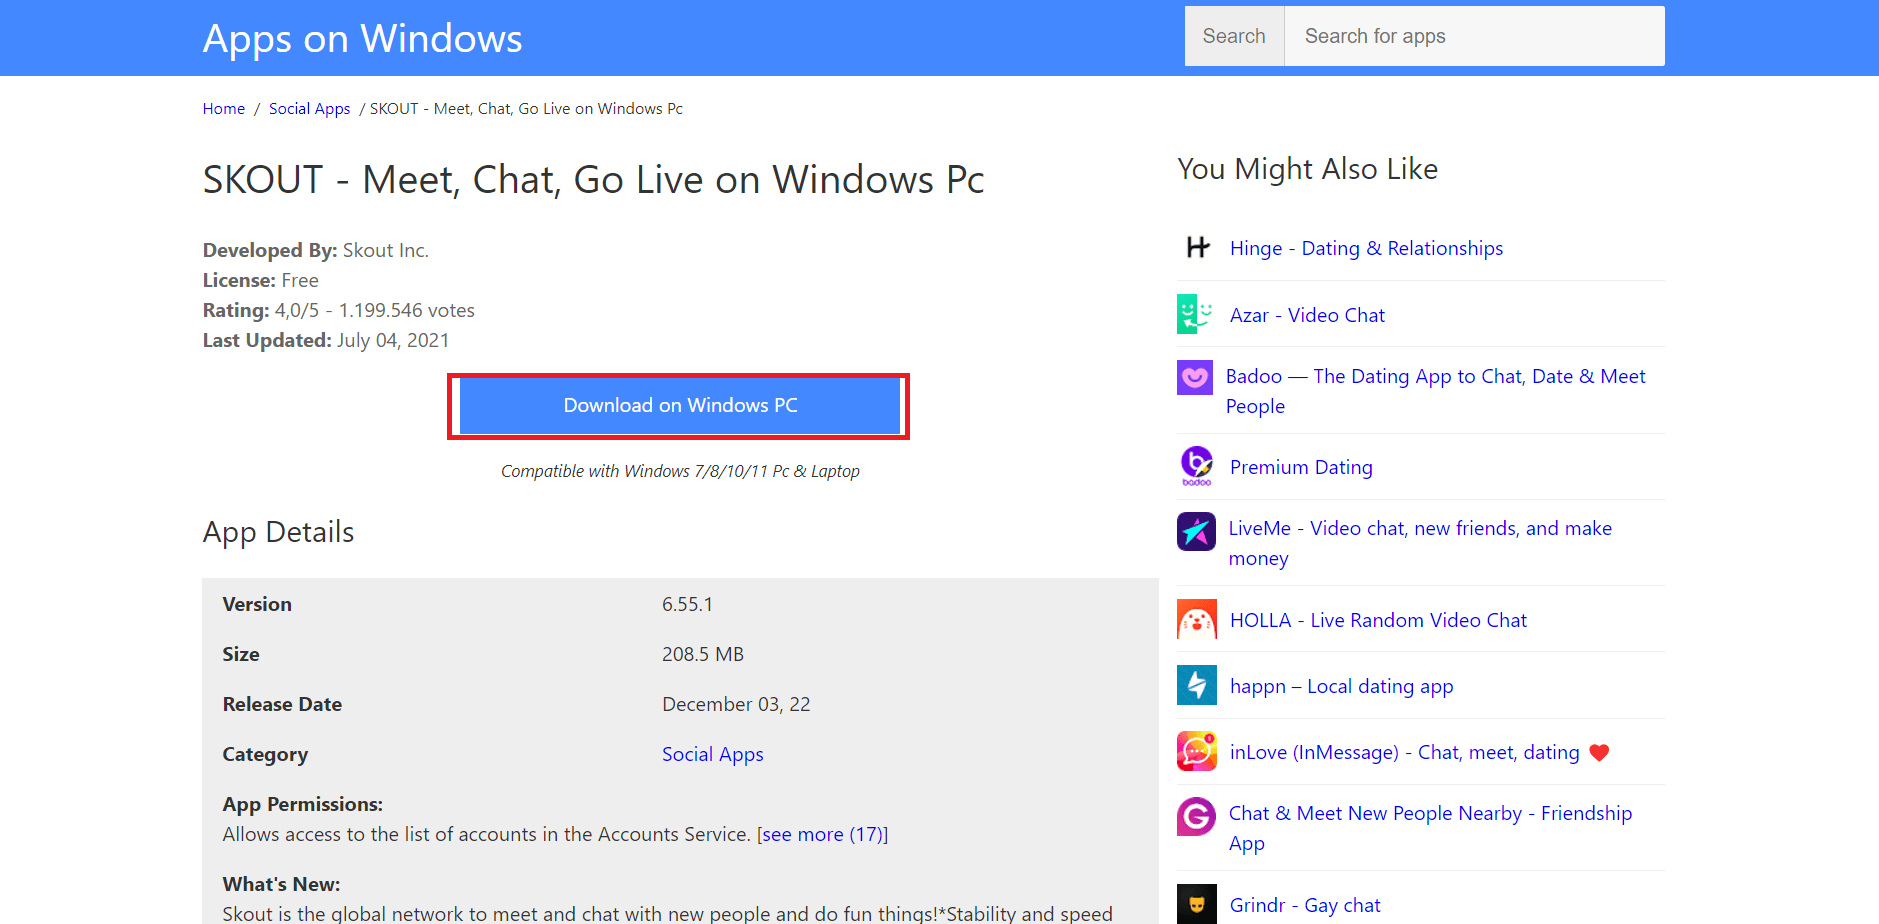  Now click on Download on Windows PC. | How to Sign Up for Skout